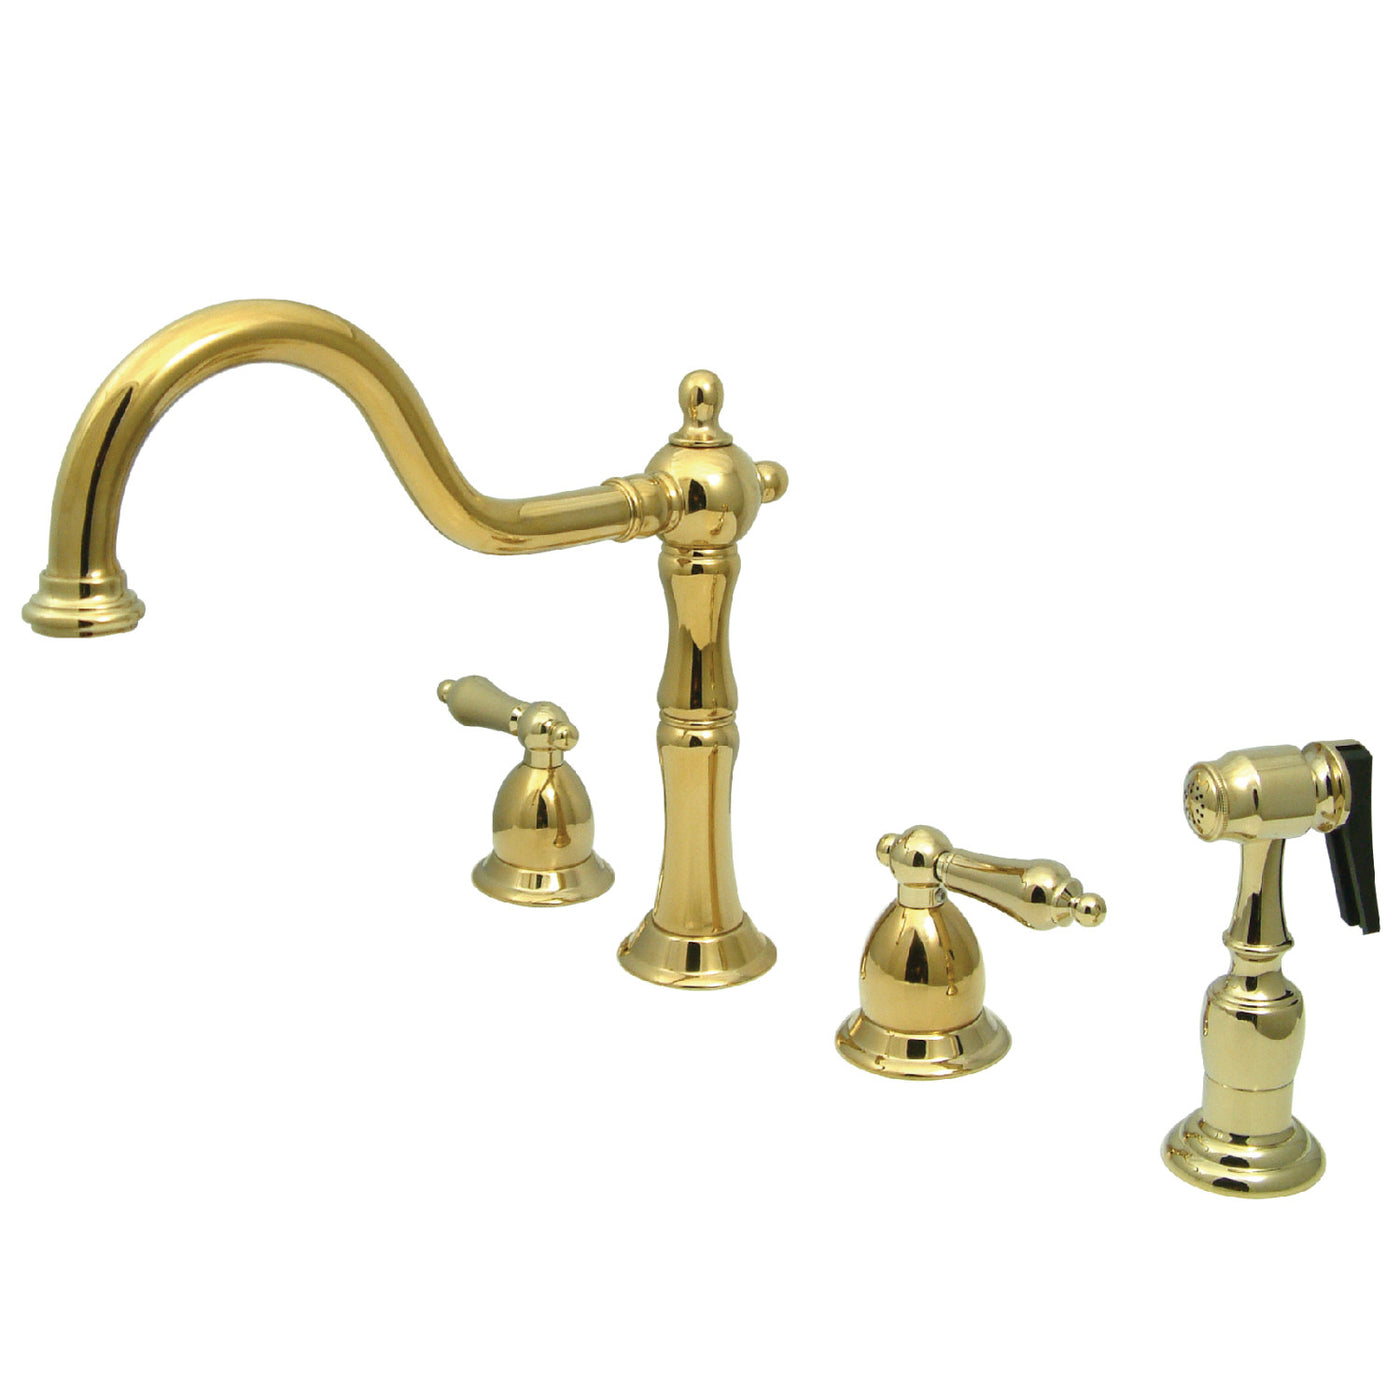 Elements of Design EB1792ALBS Widespread Kitchen Faucet with Brass Sprayer, Polished Brass